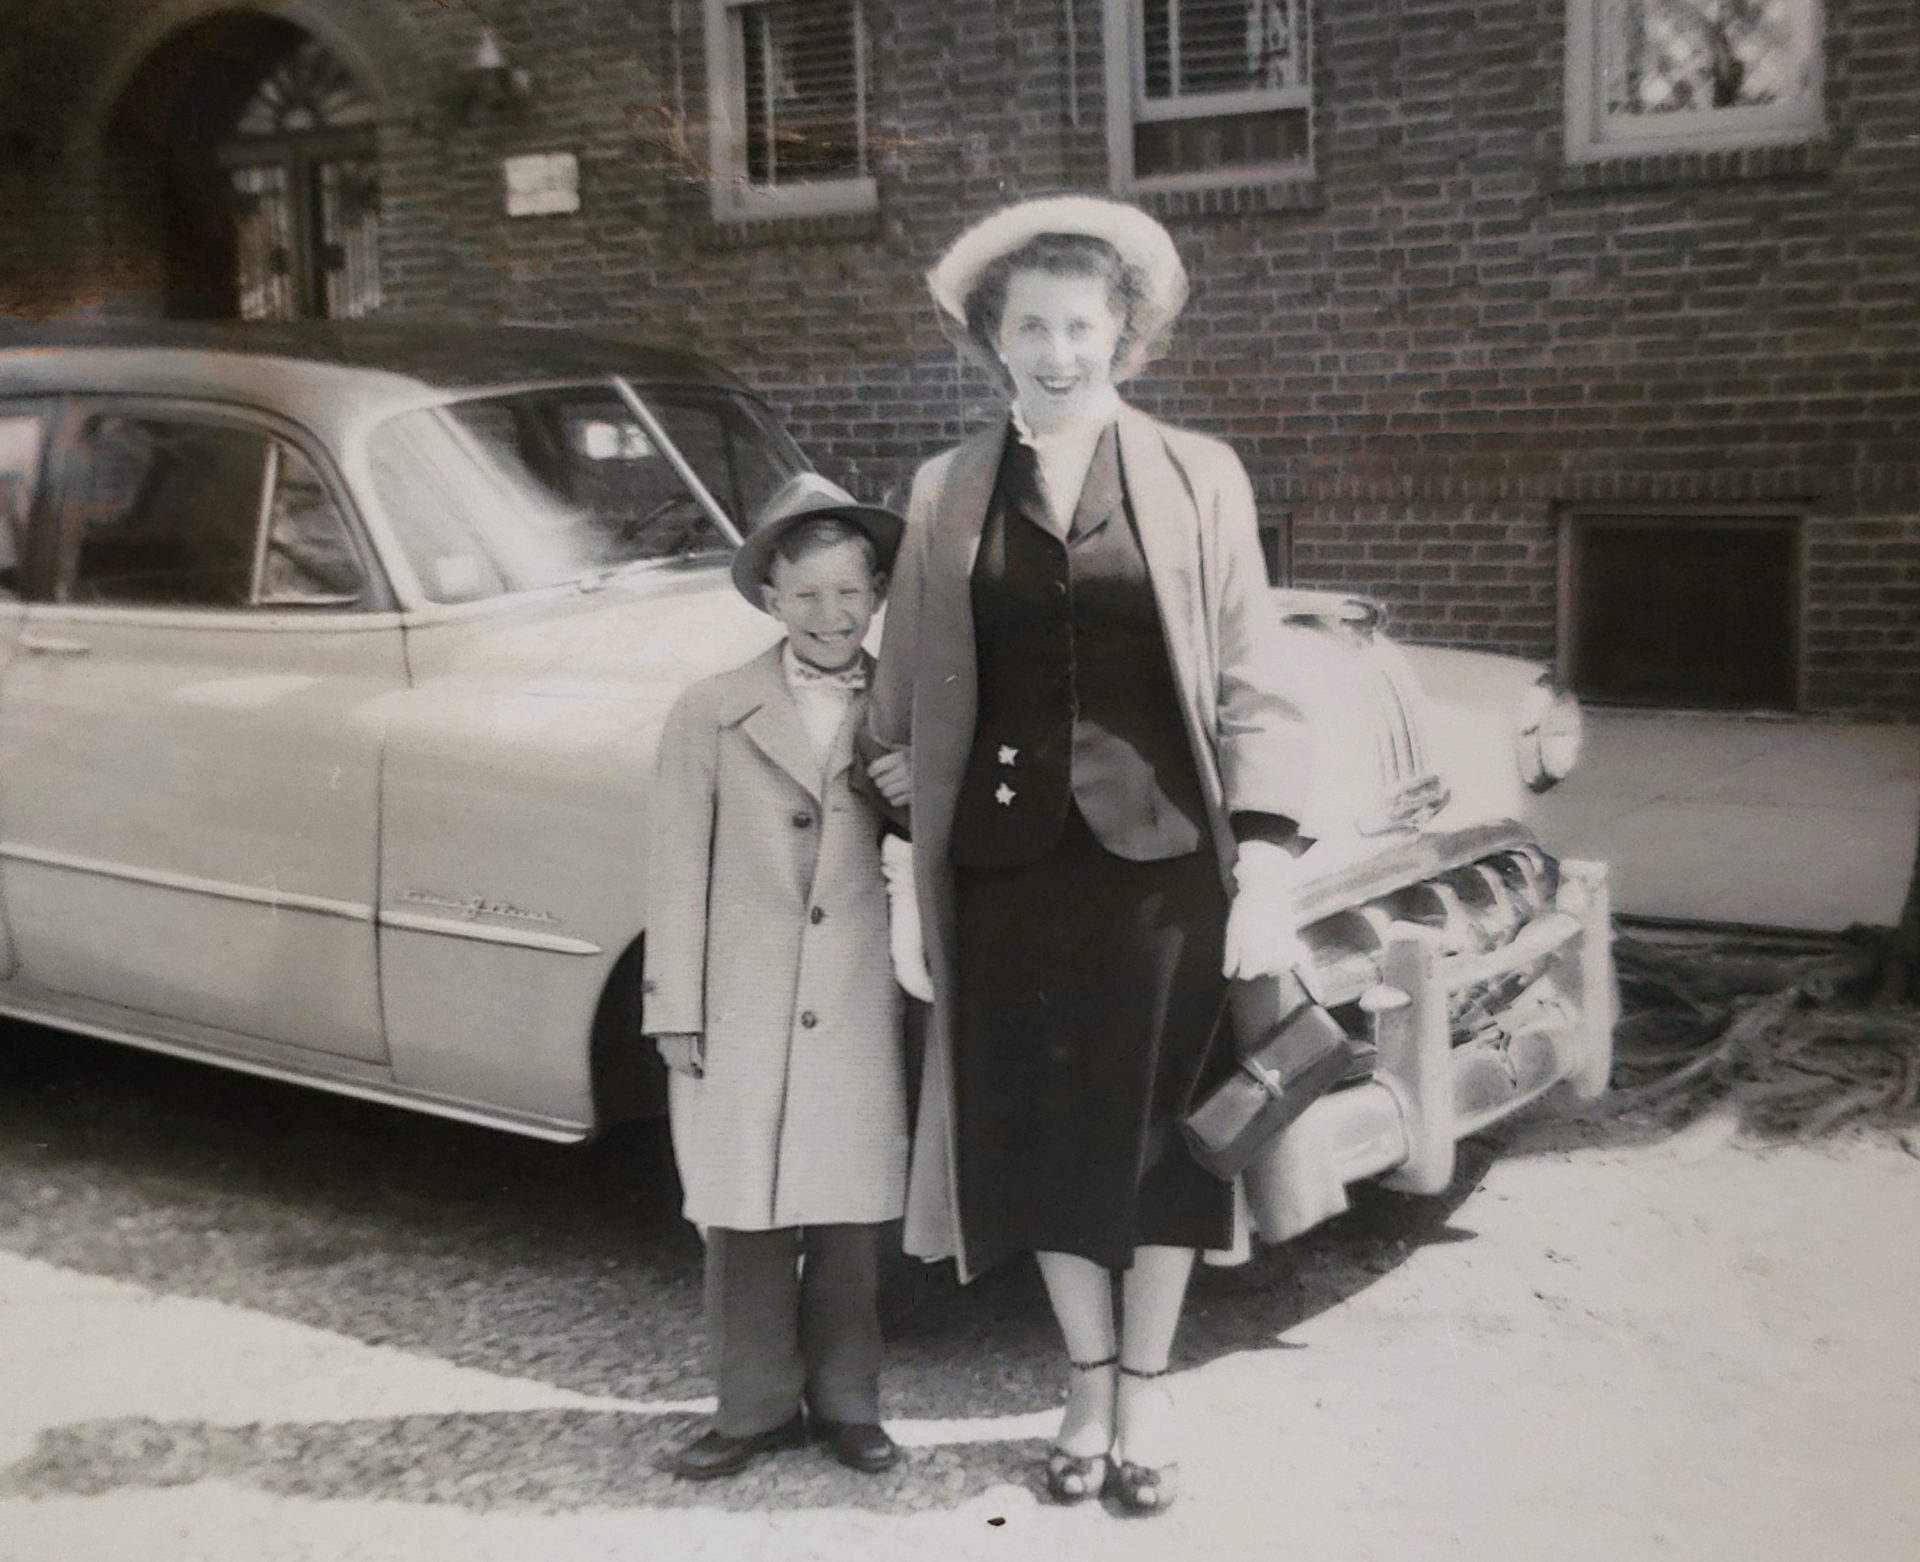 A young Ken with our mom in NY.